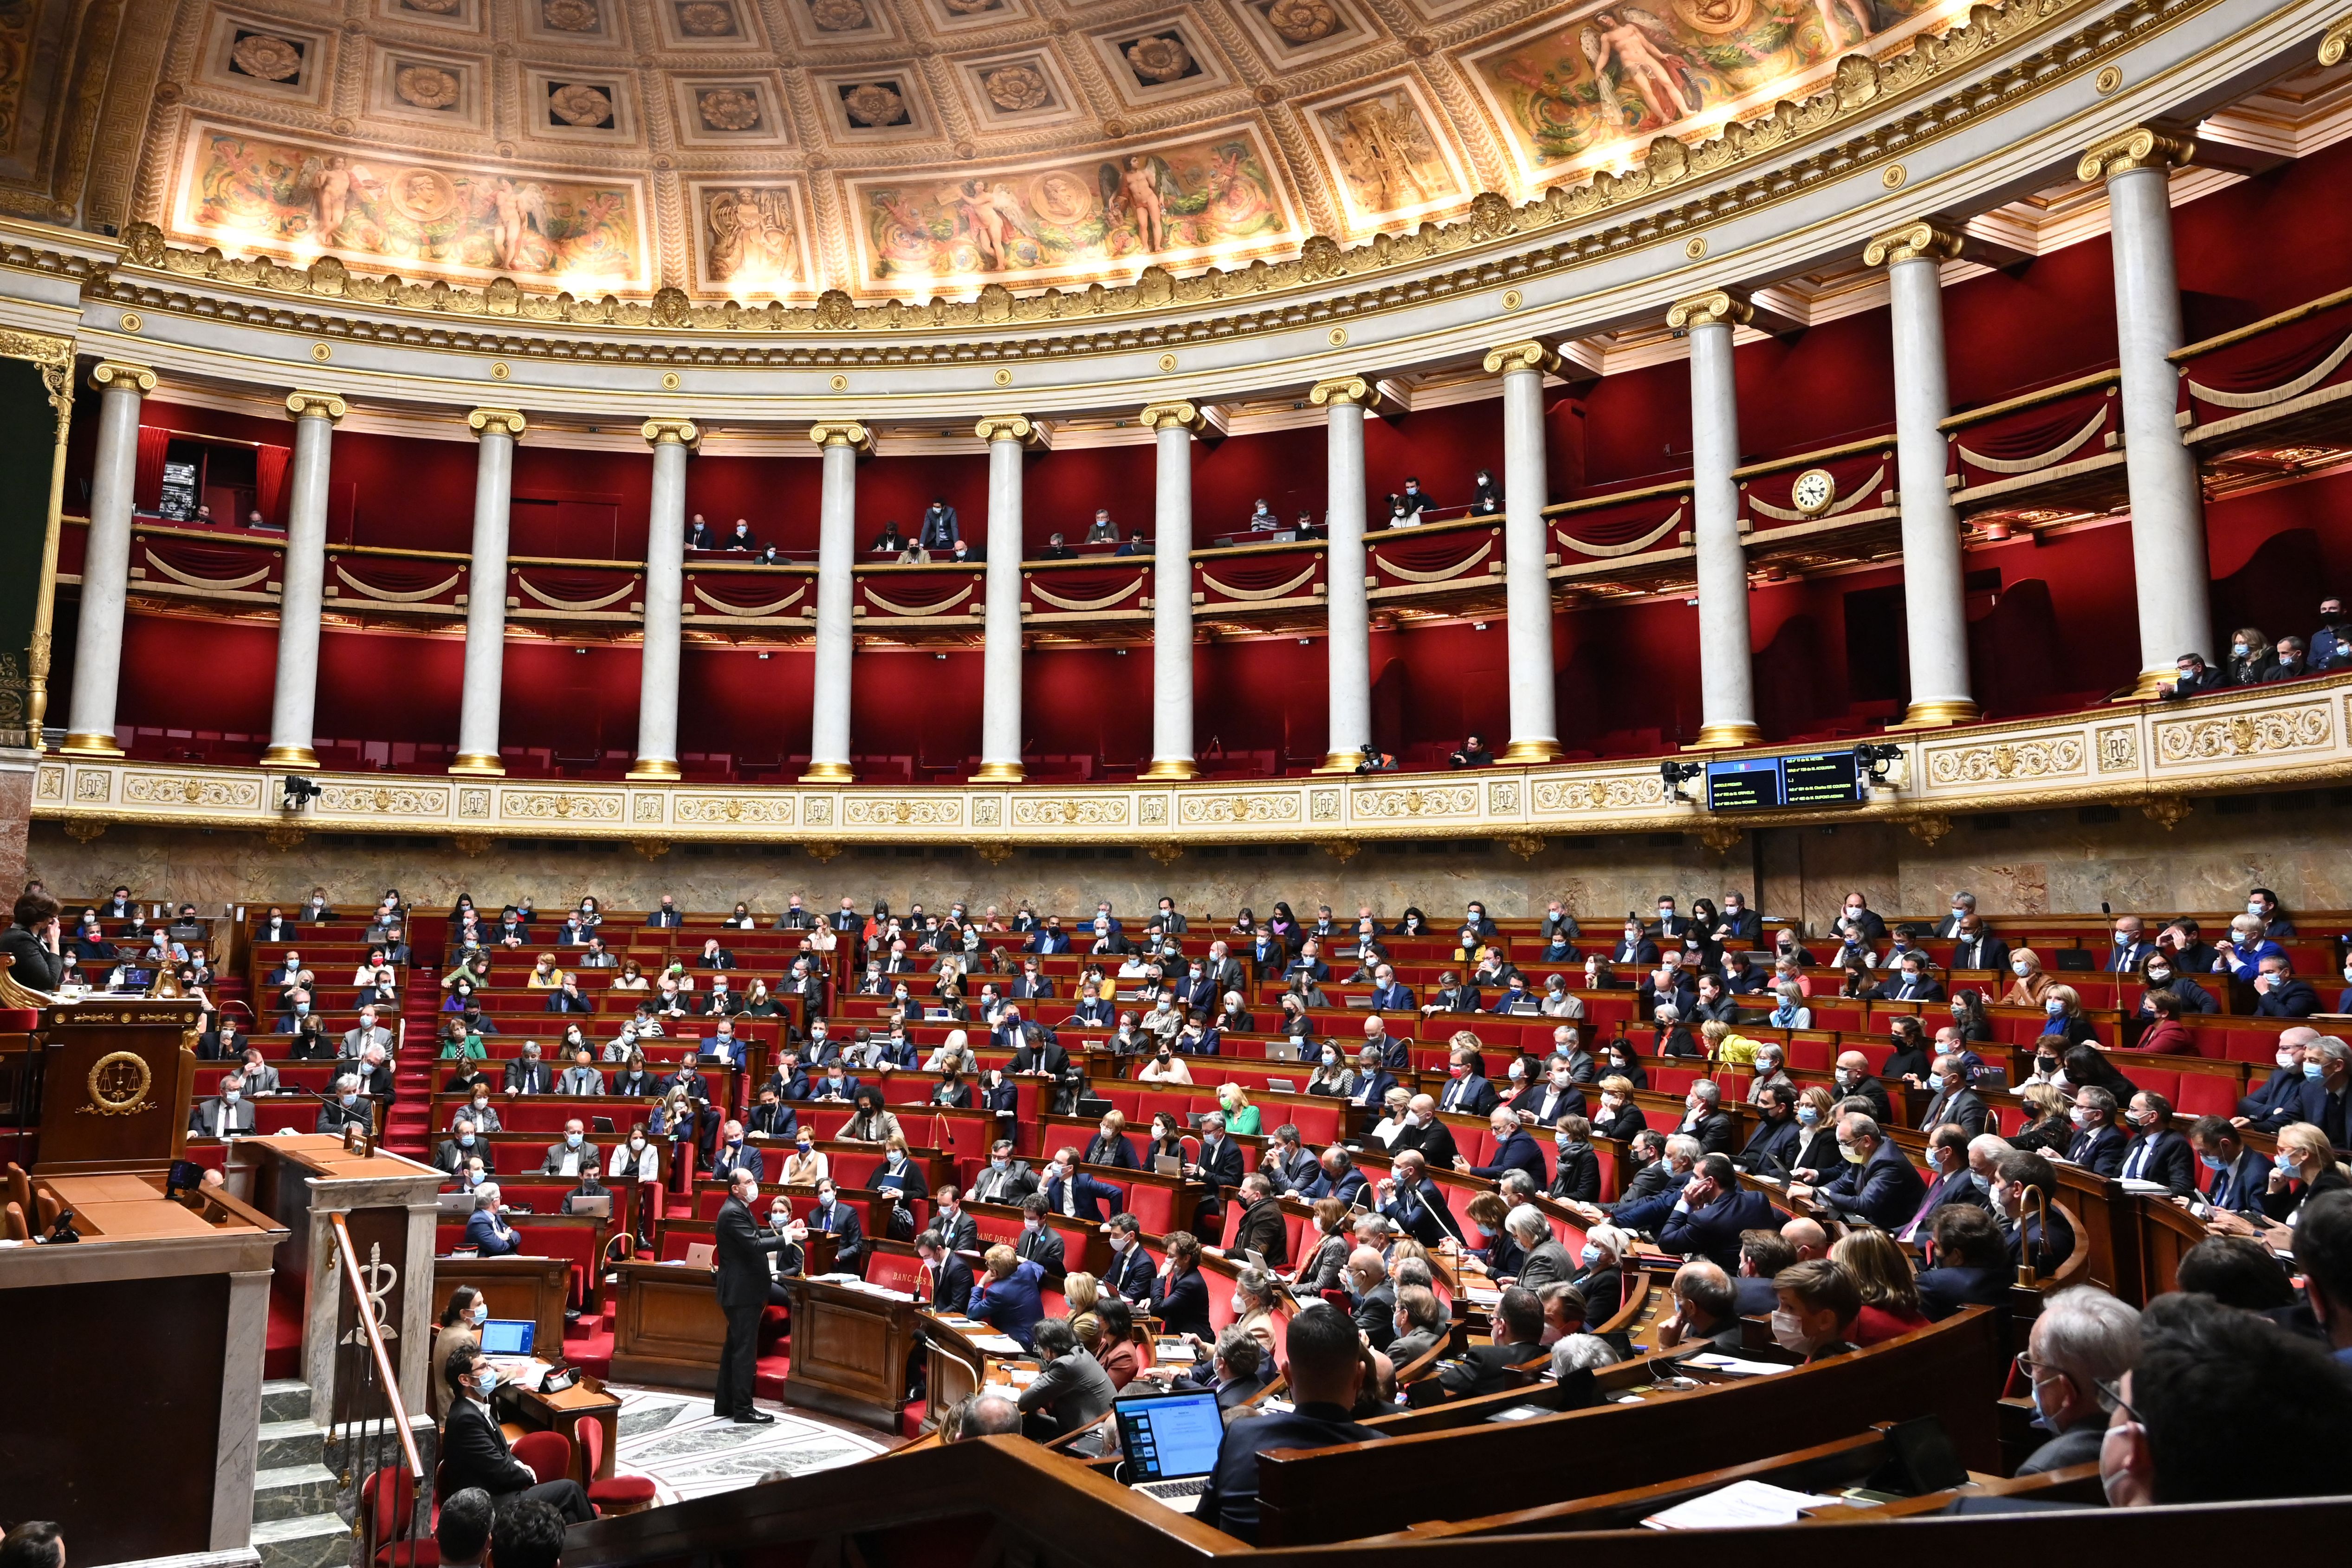 French Prime Minister Jean Castex (center) speaks during a session at the French National Assembly in Paris, on January 5, 2022.